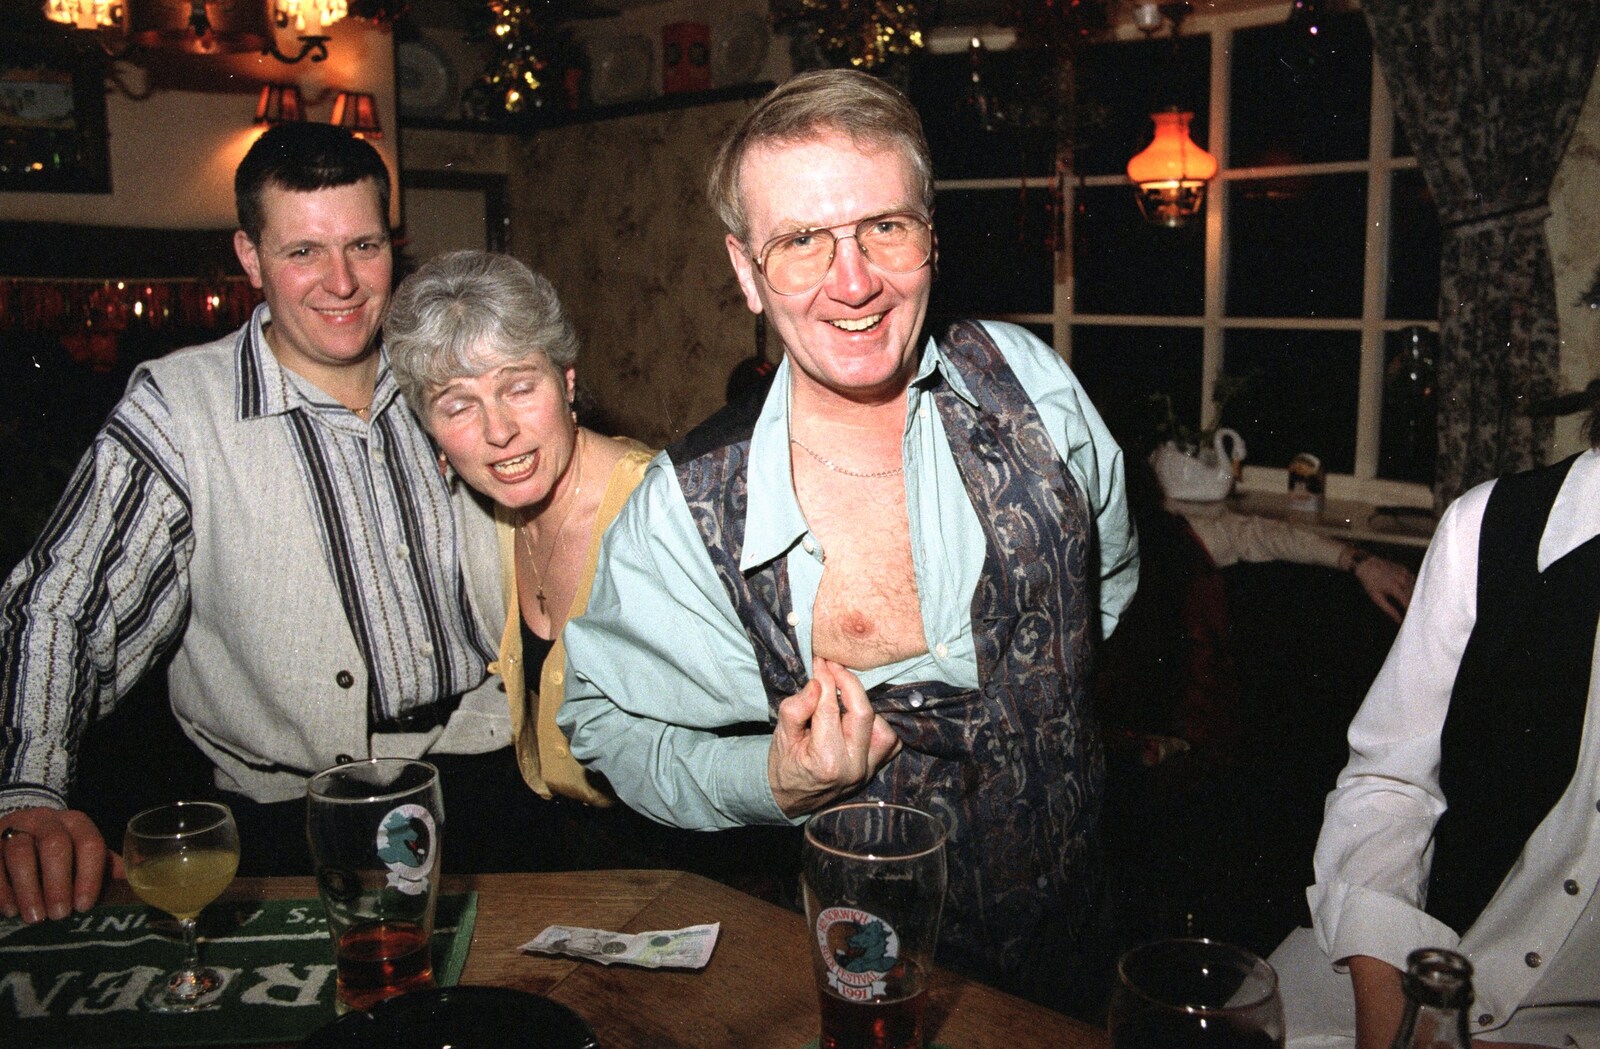 John Willy gets a nipple out from New Year's Eve at the Swan Inn, Brome, Suffolk - 31st December 1994